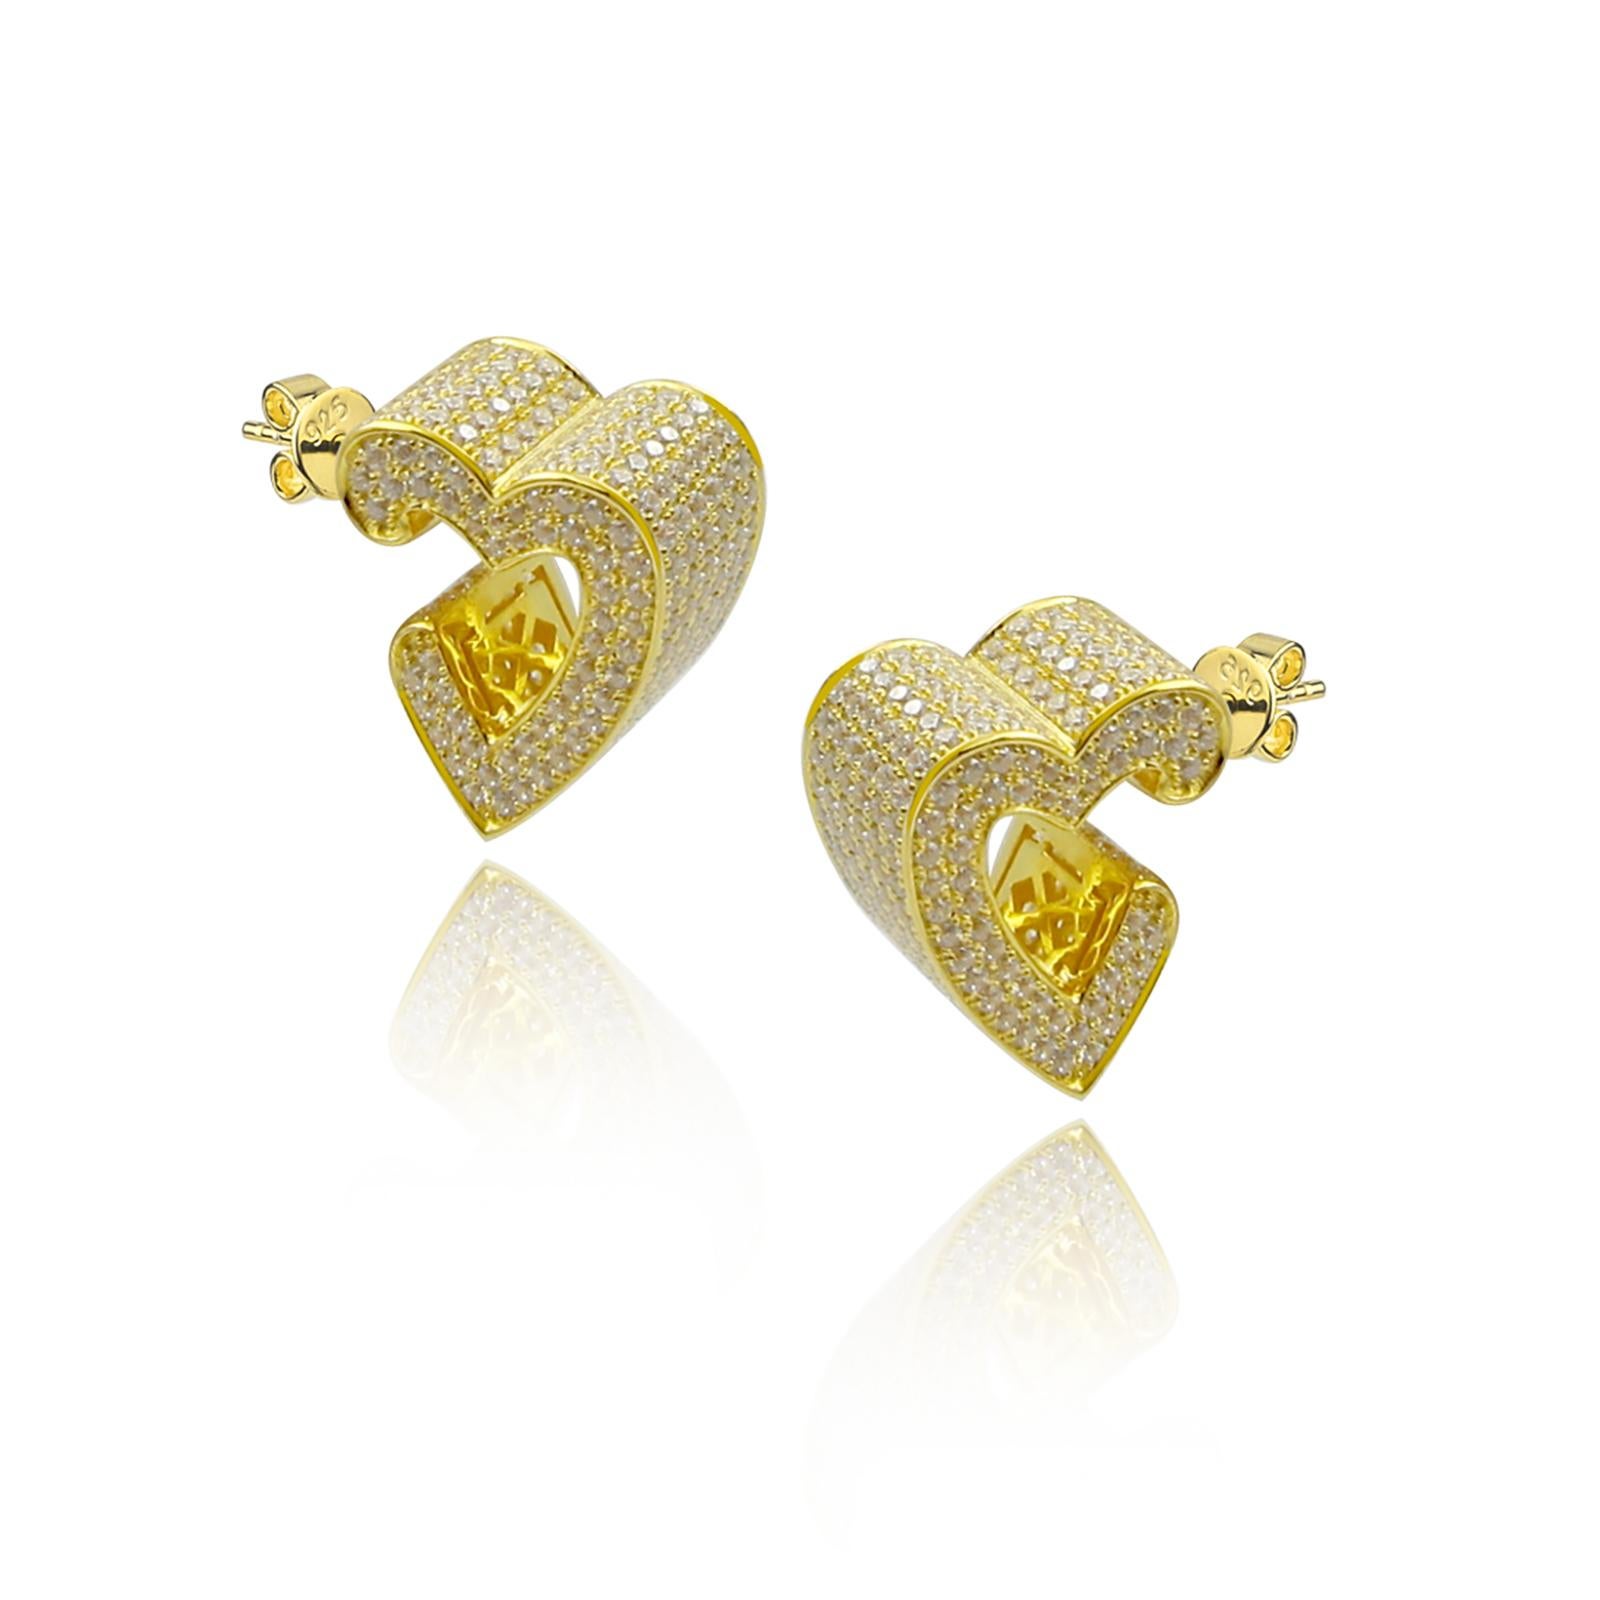 3D Heart Pave Earrings In New Condition For Sale In New York, NY